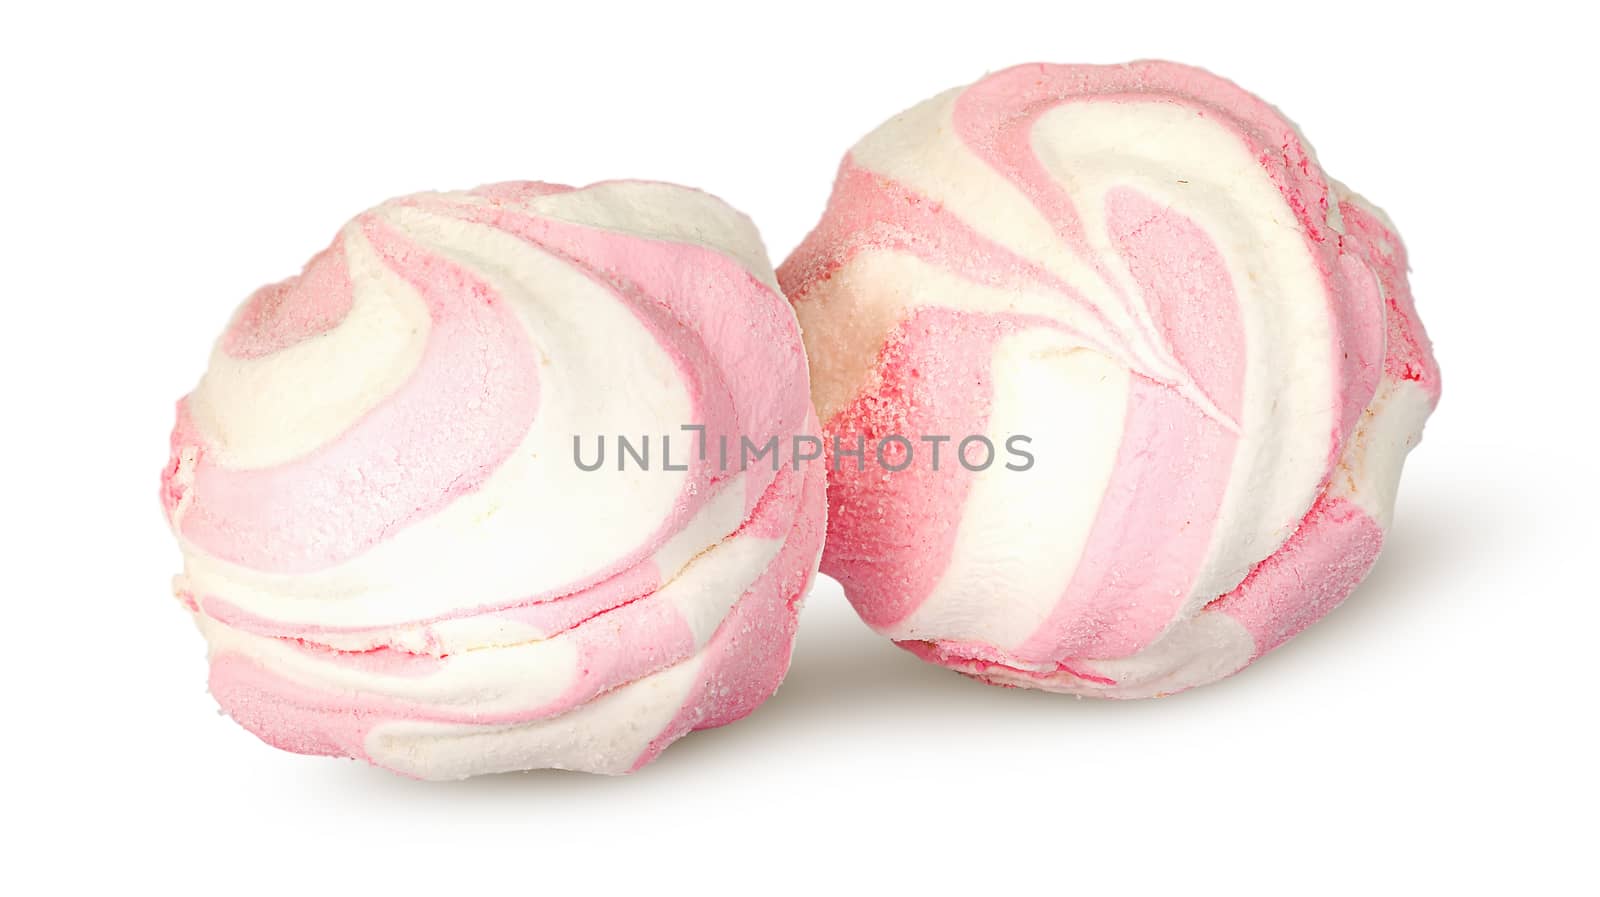 Two white and pink marshmallows each other isolated on white background